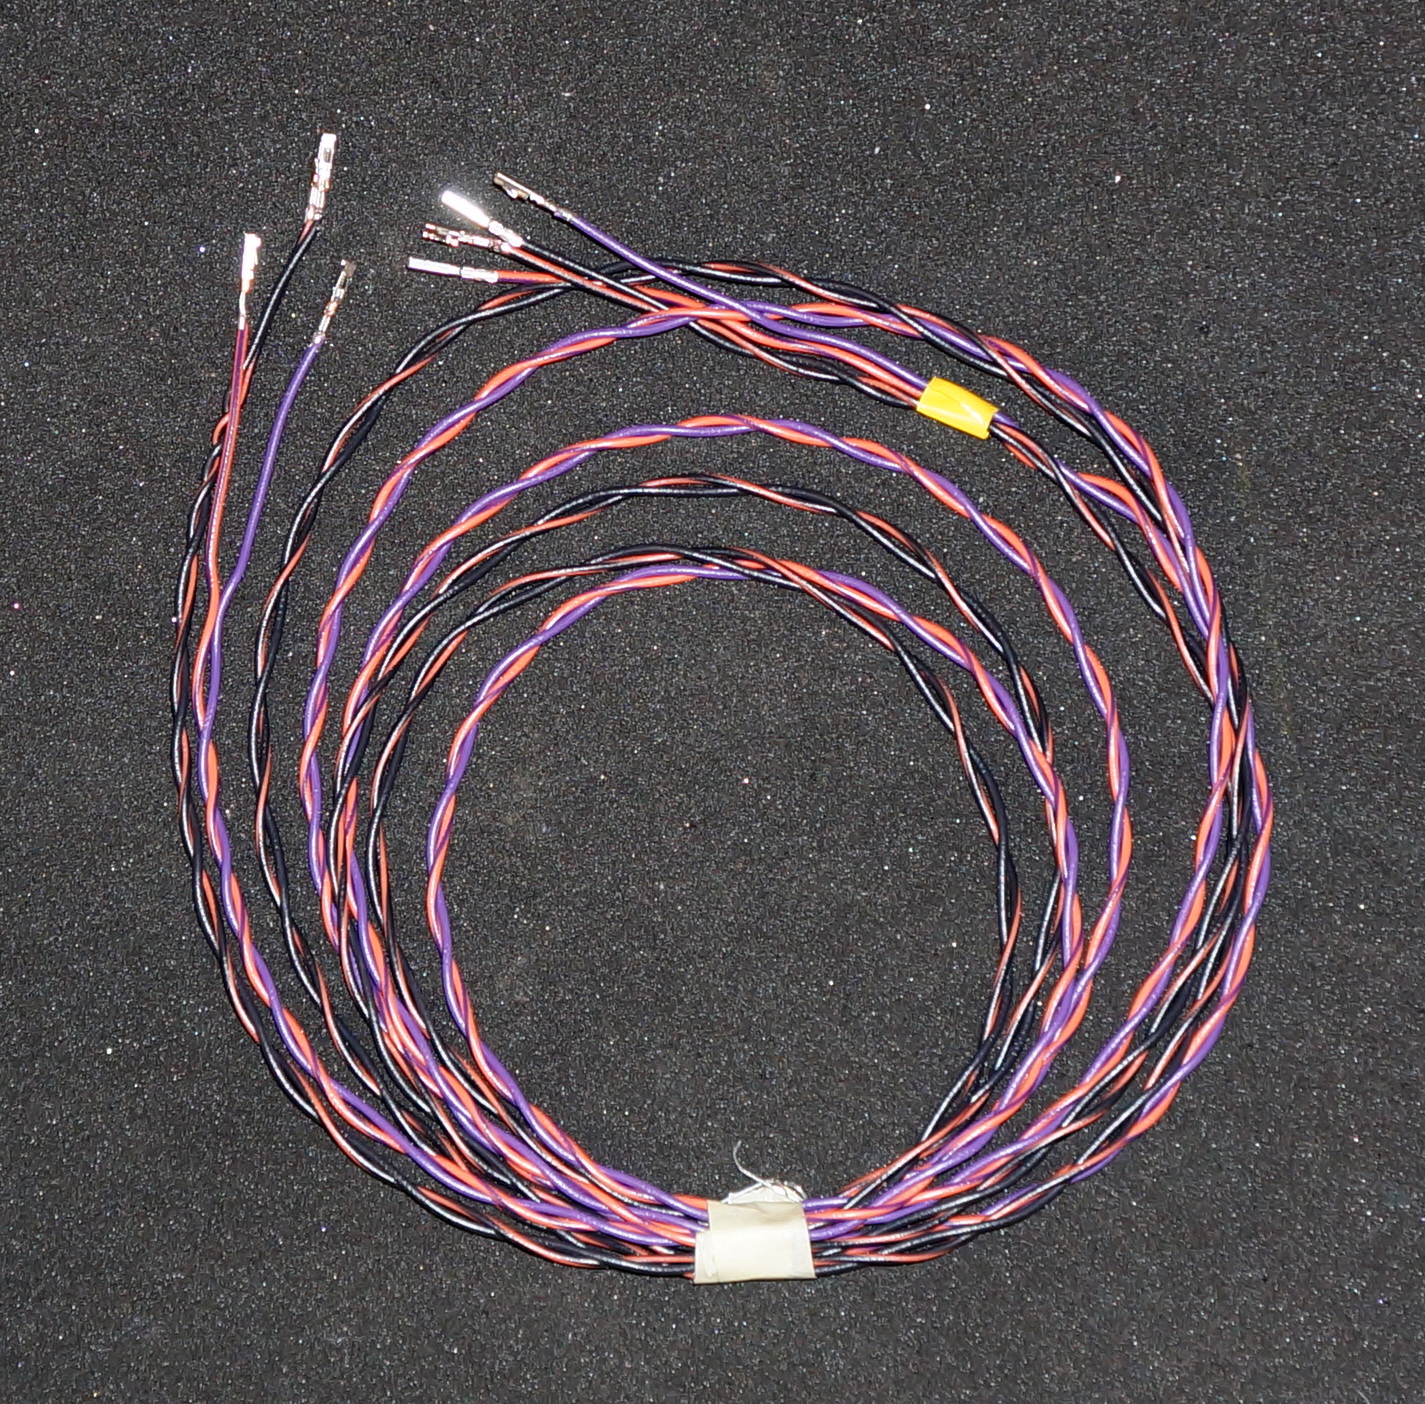 Cable Harness